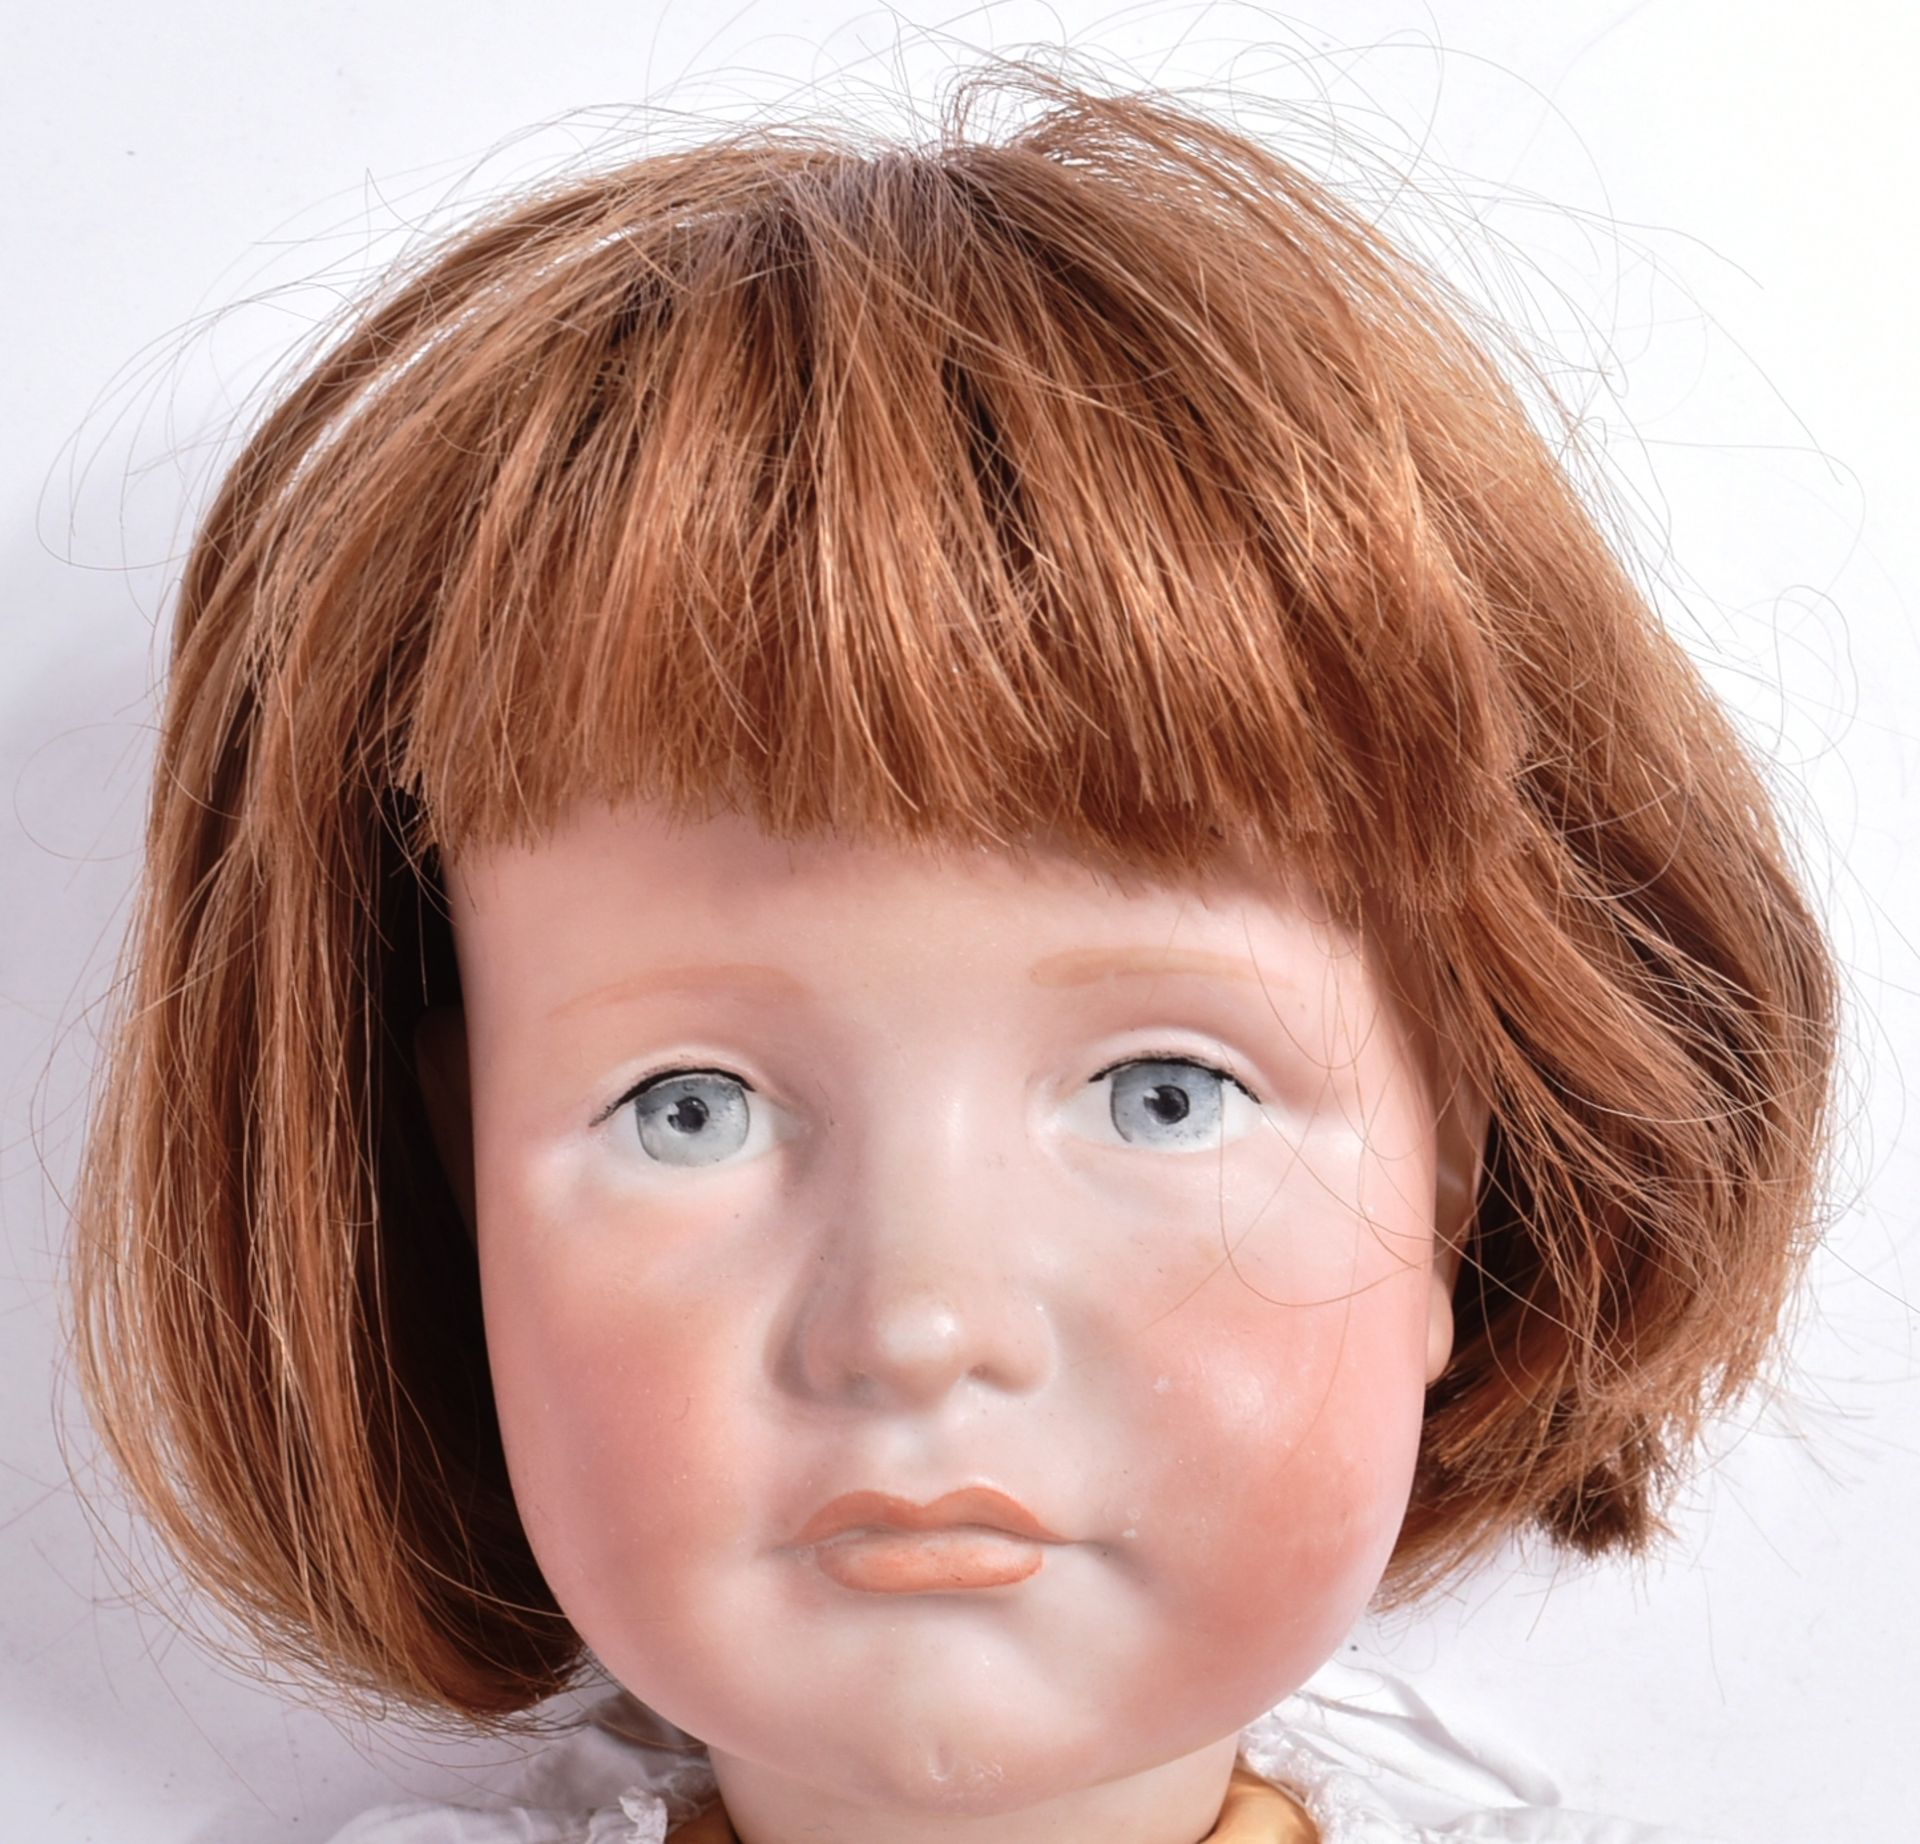 EARLY 20TH CENTURY GERMAN KAMMER & REINHARDT BISQUE HEADED DOLL - Image 2 of 5